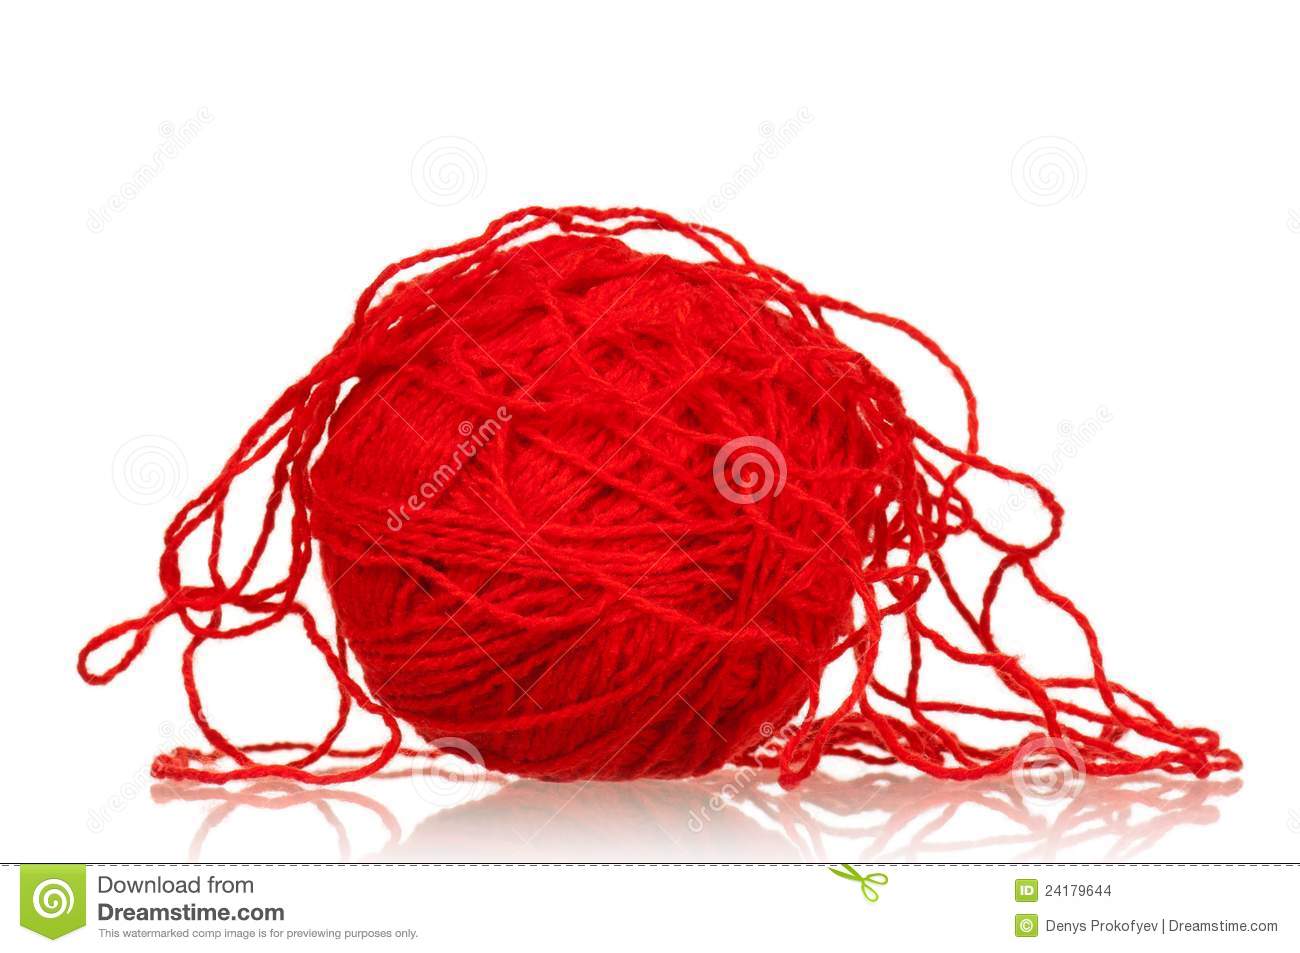 Red Ball Of Yarn For Knitting Isolated On White Background